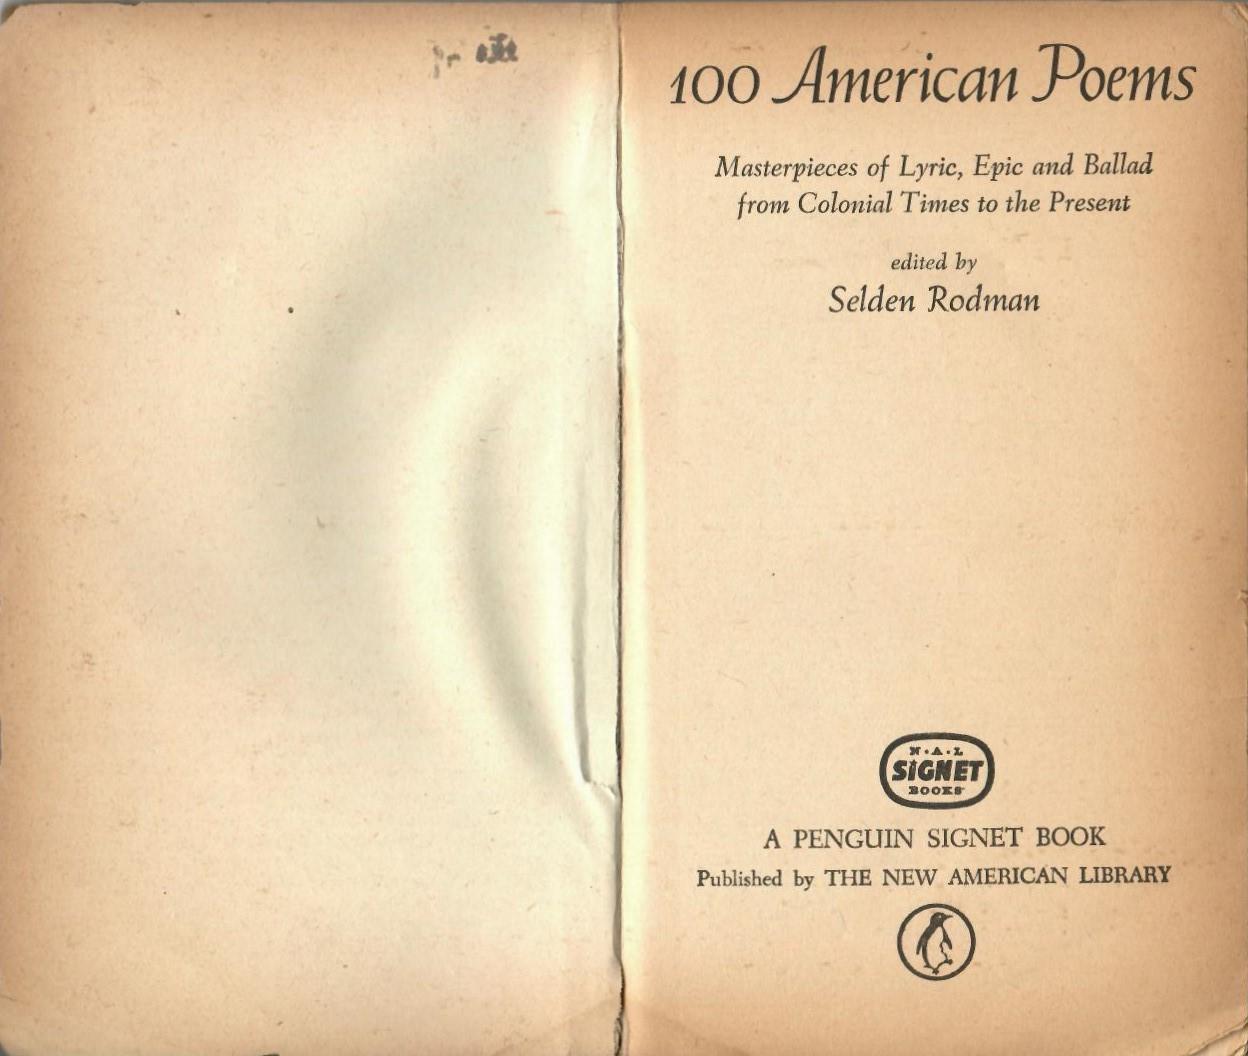 Rodman, Selden  (samenstelling) - 100 American poems. Masterpieces of lyric, epic and ballad from colonial times to the present